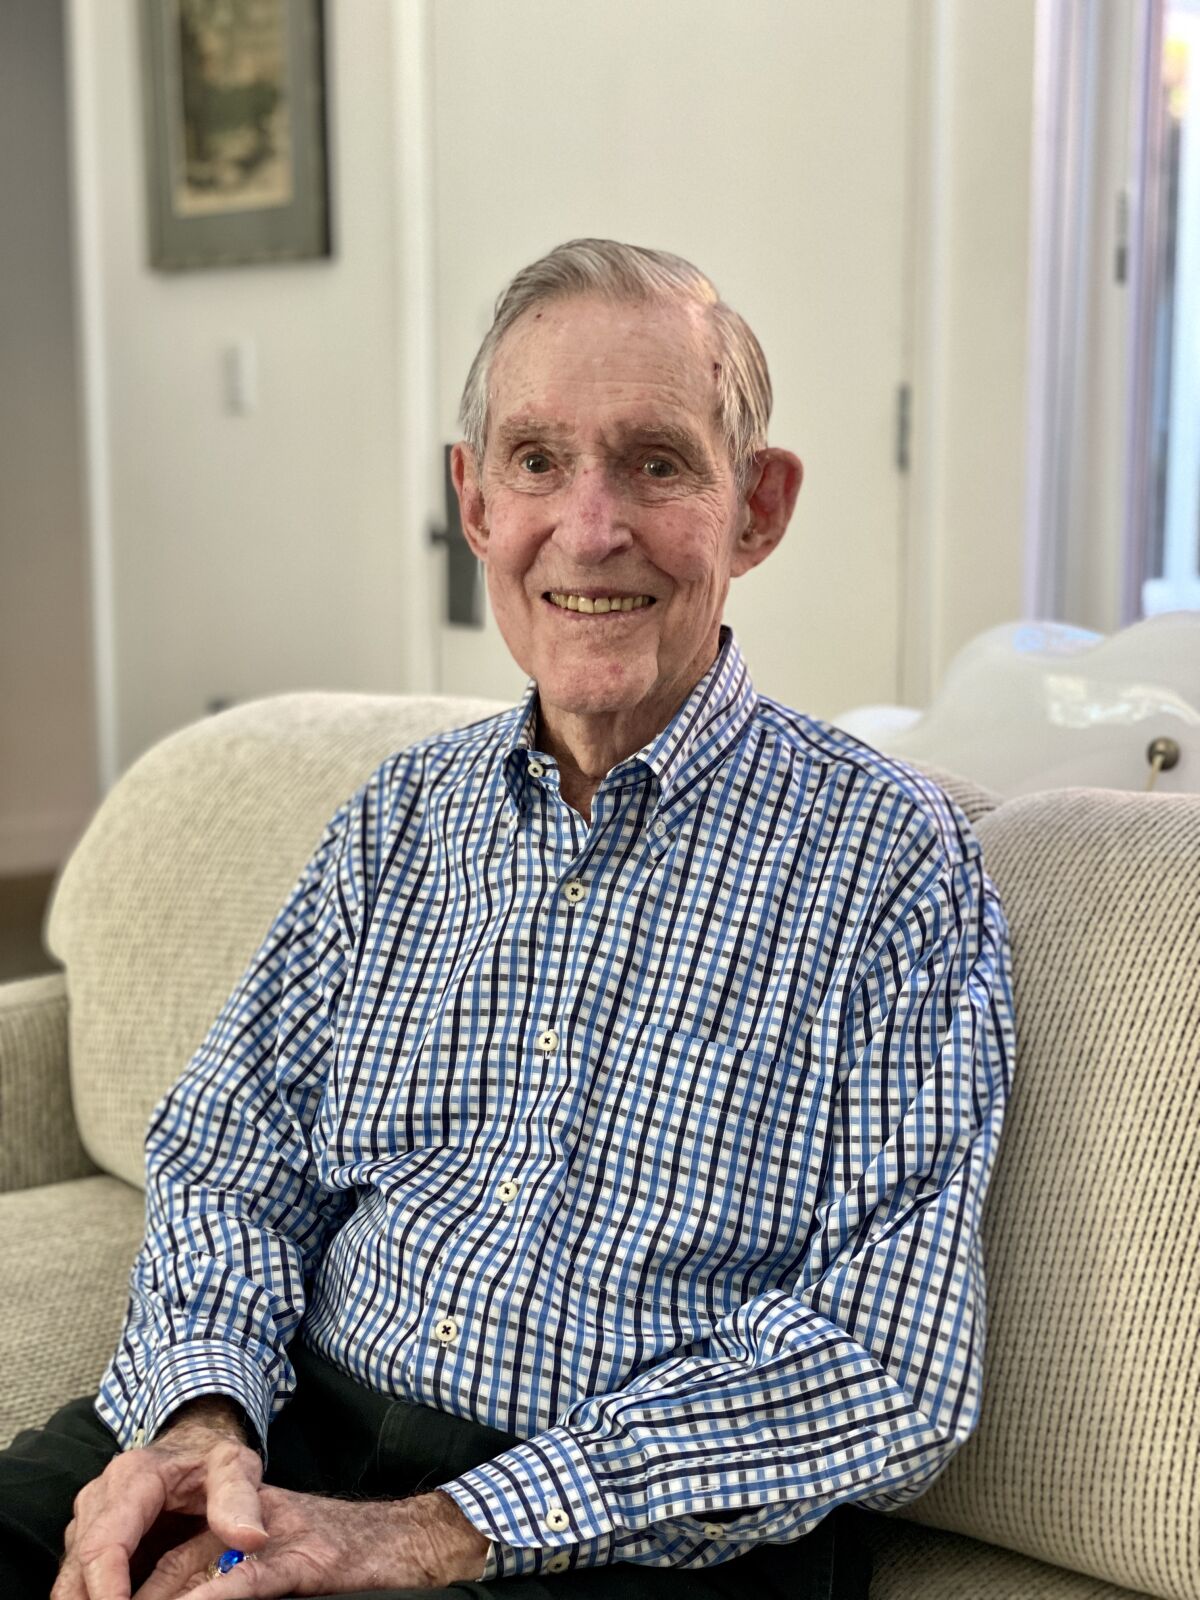 Robert Smothers says his military service is the highlight of his nearly 99 years.